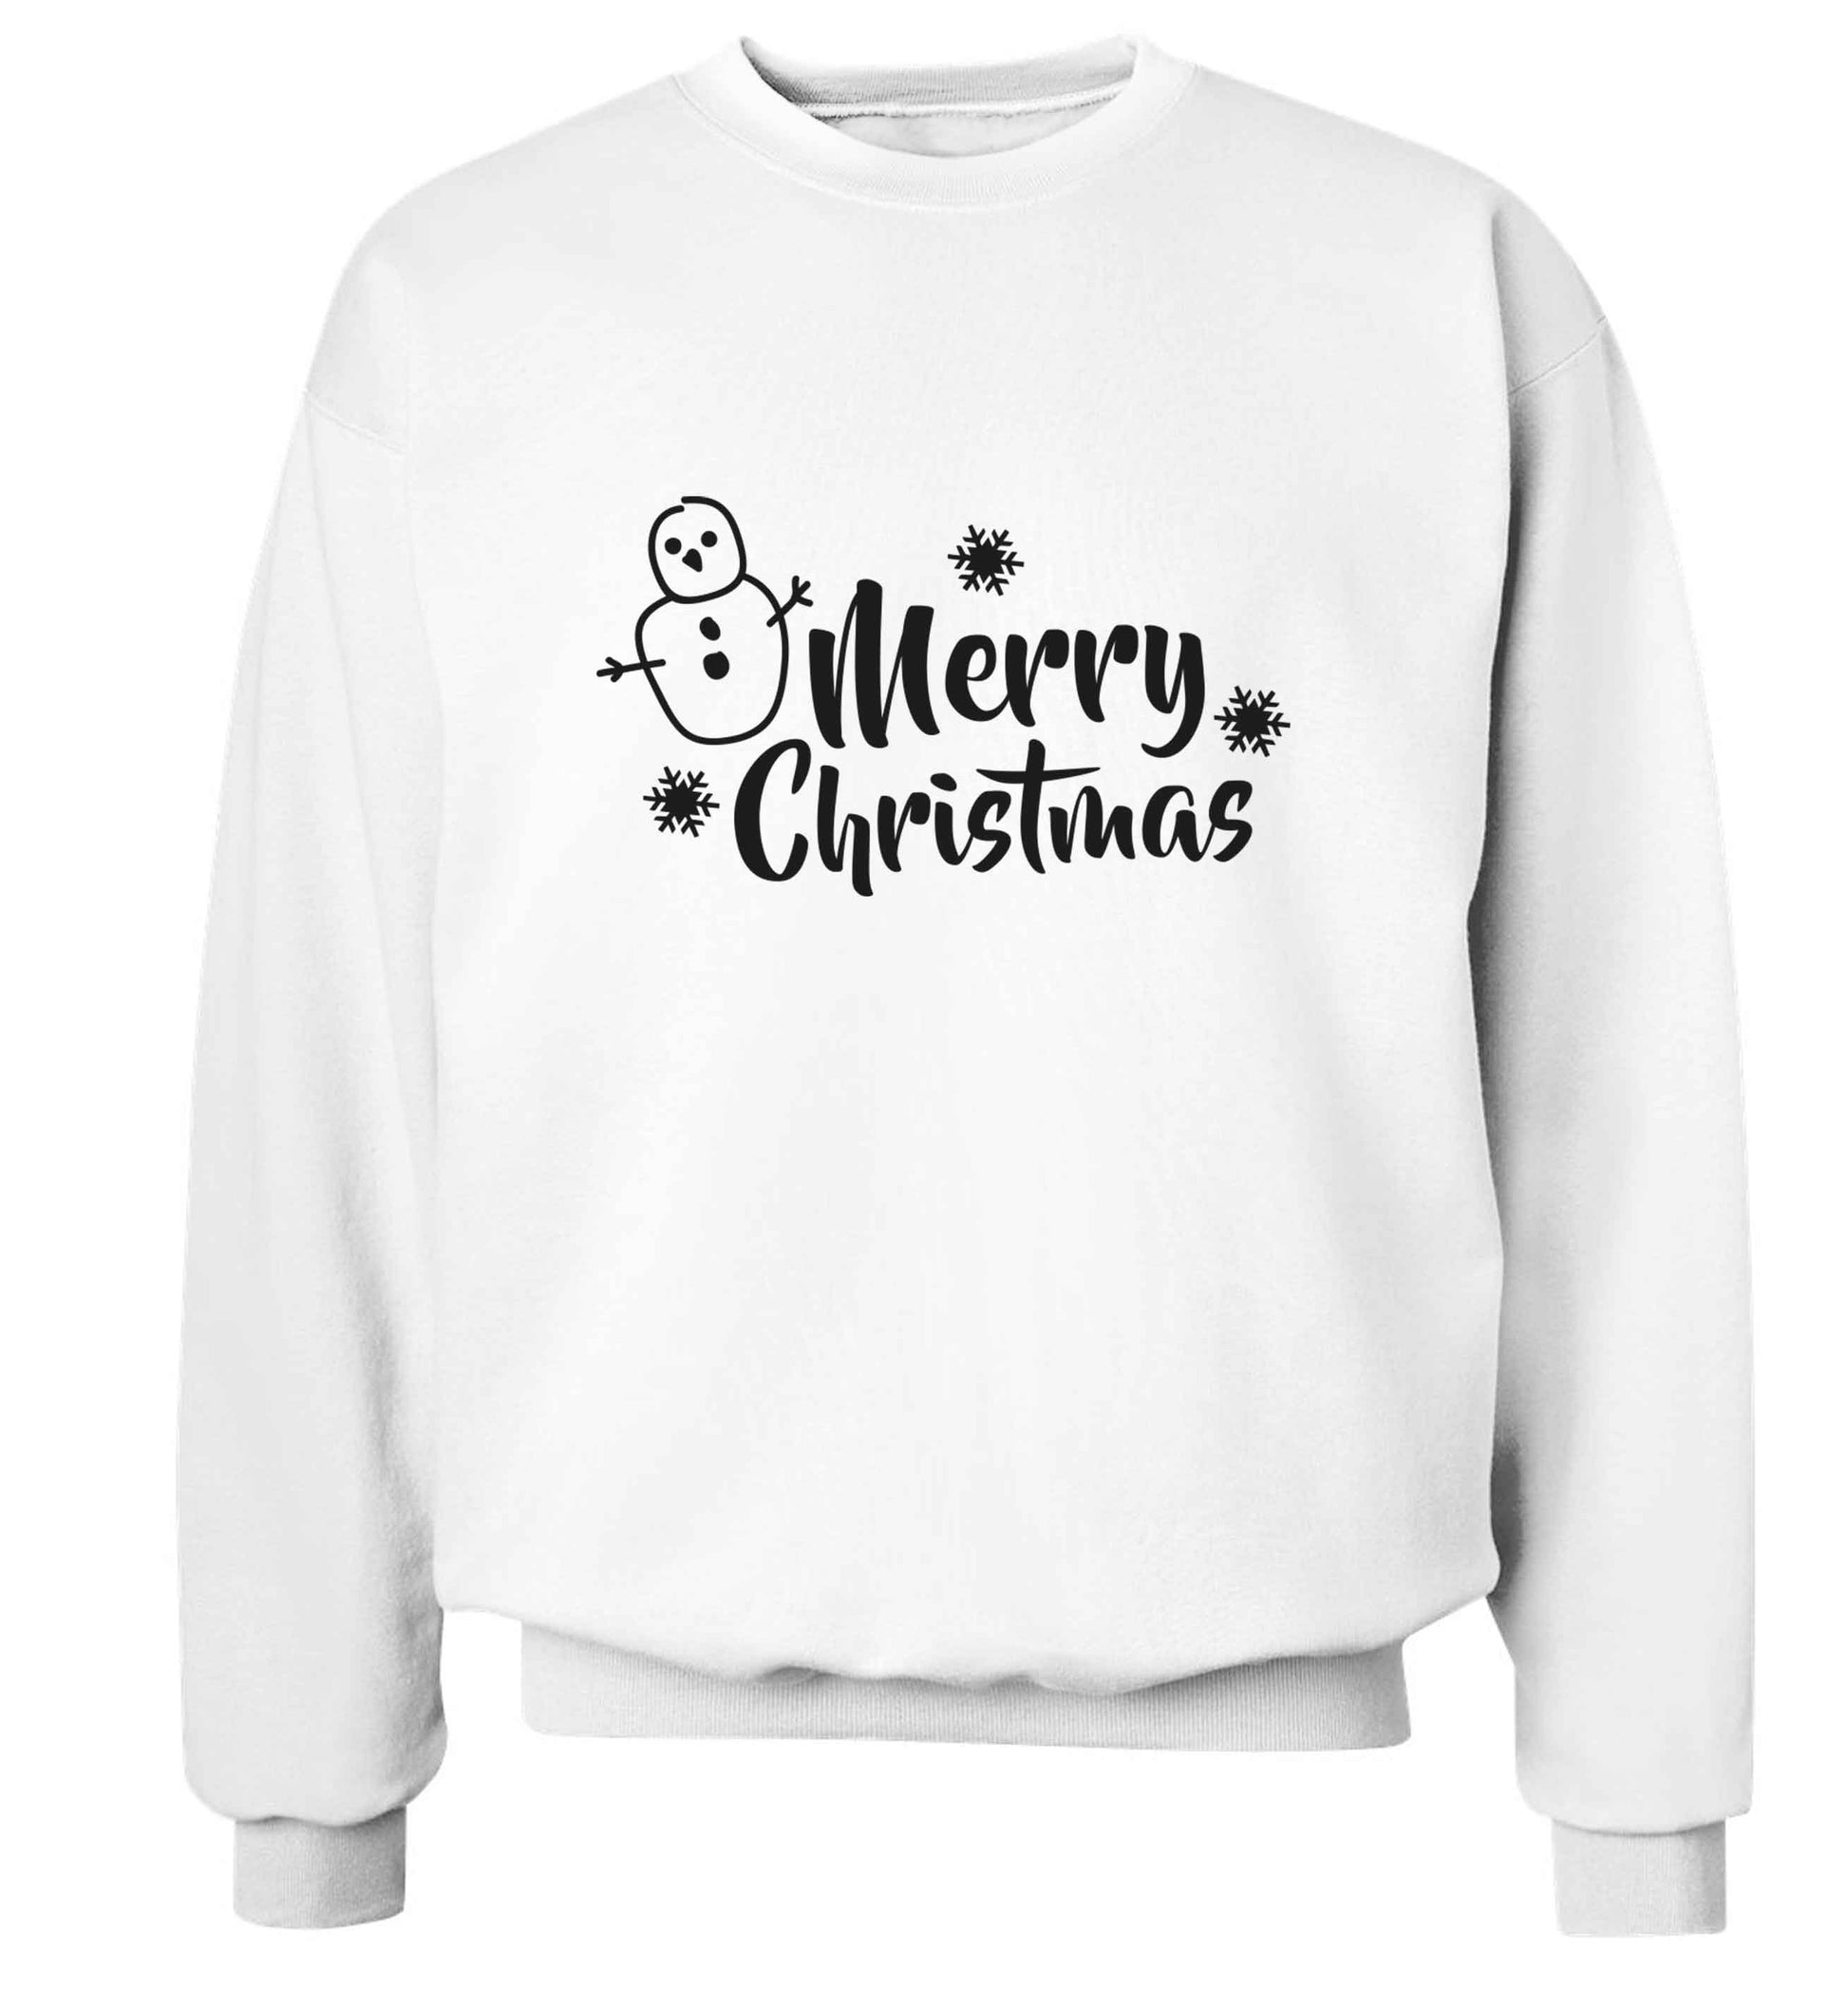 Merry Christmas - snowman adult's unisex white sweater 2XL